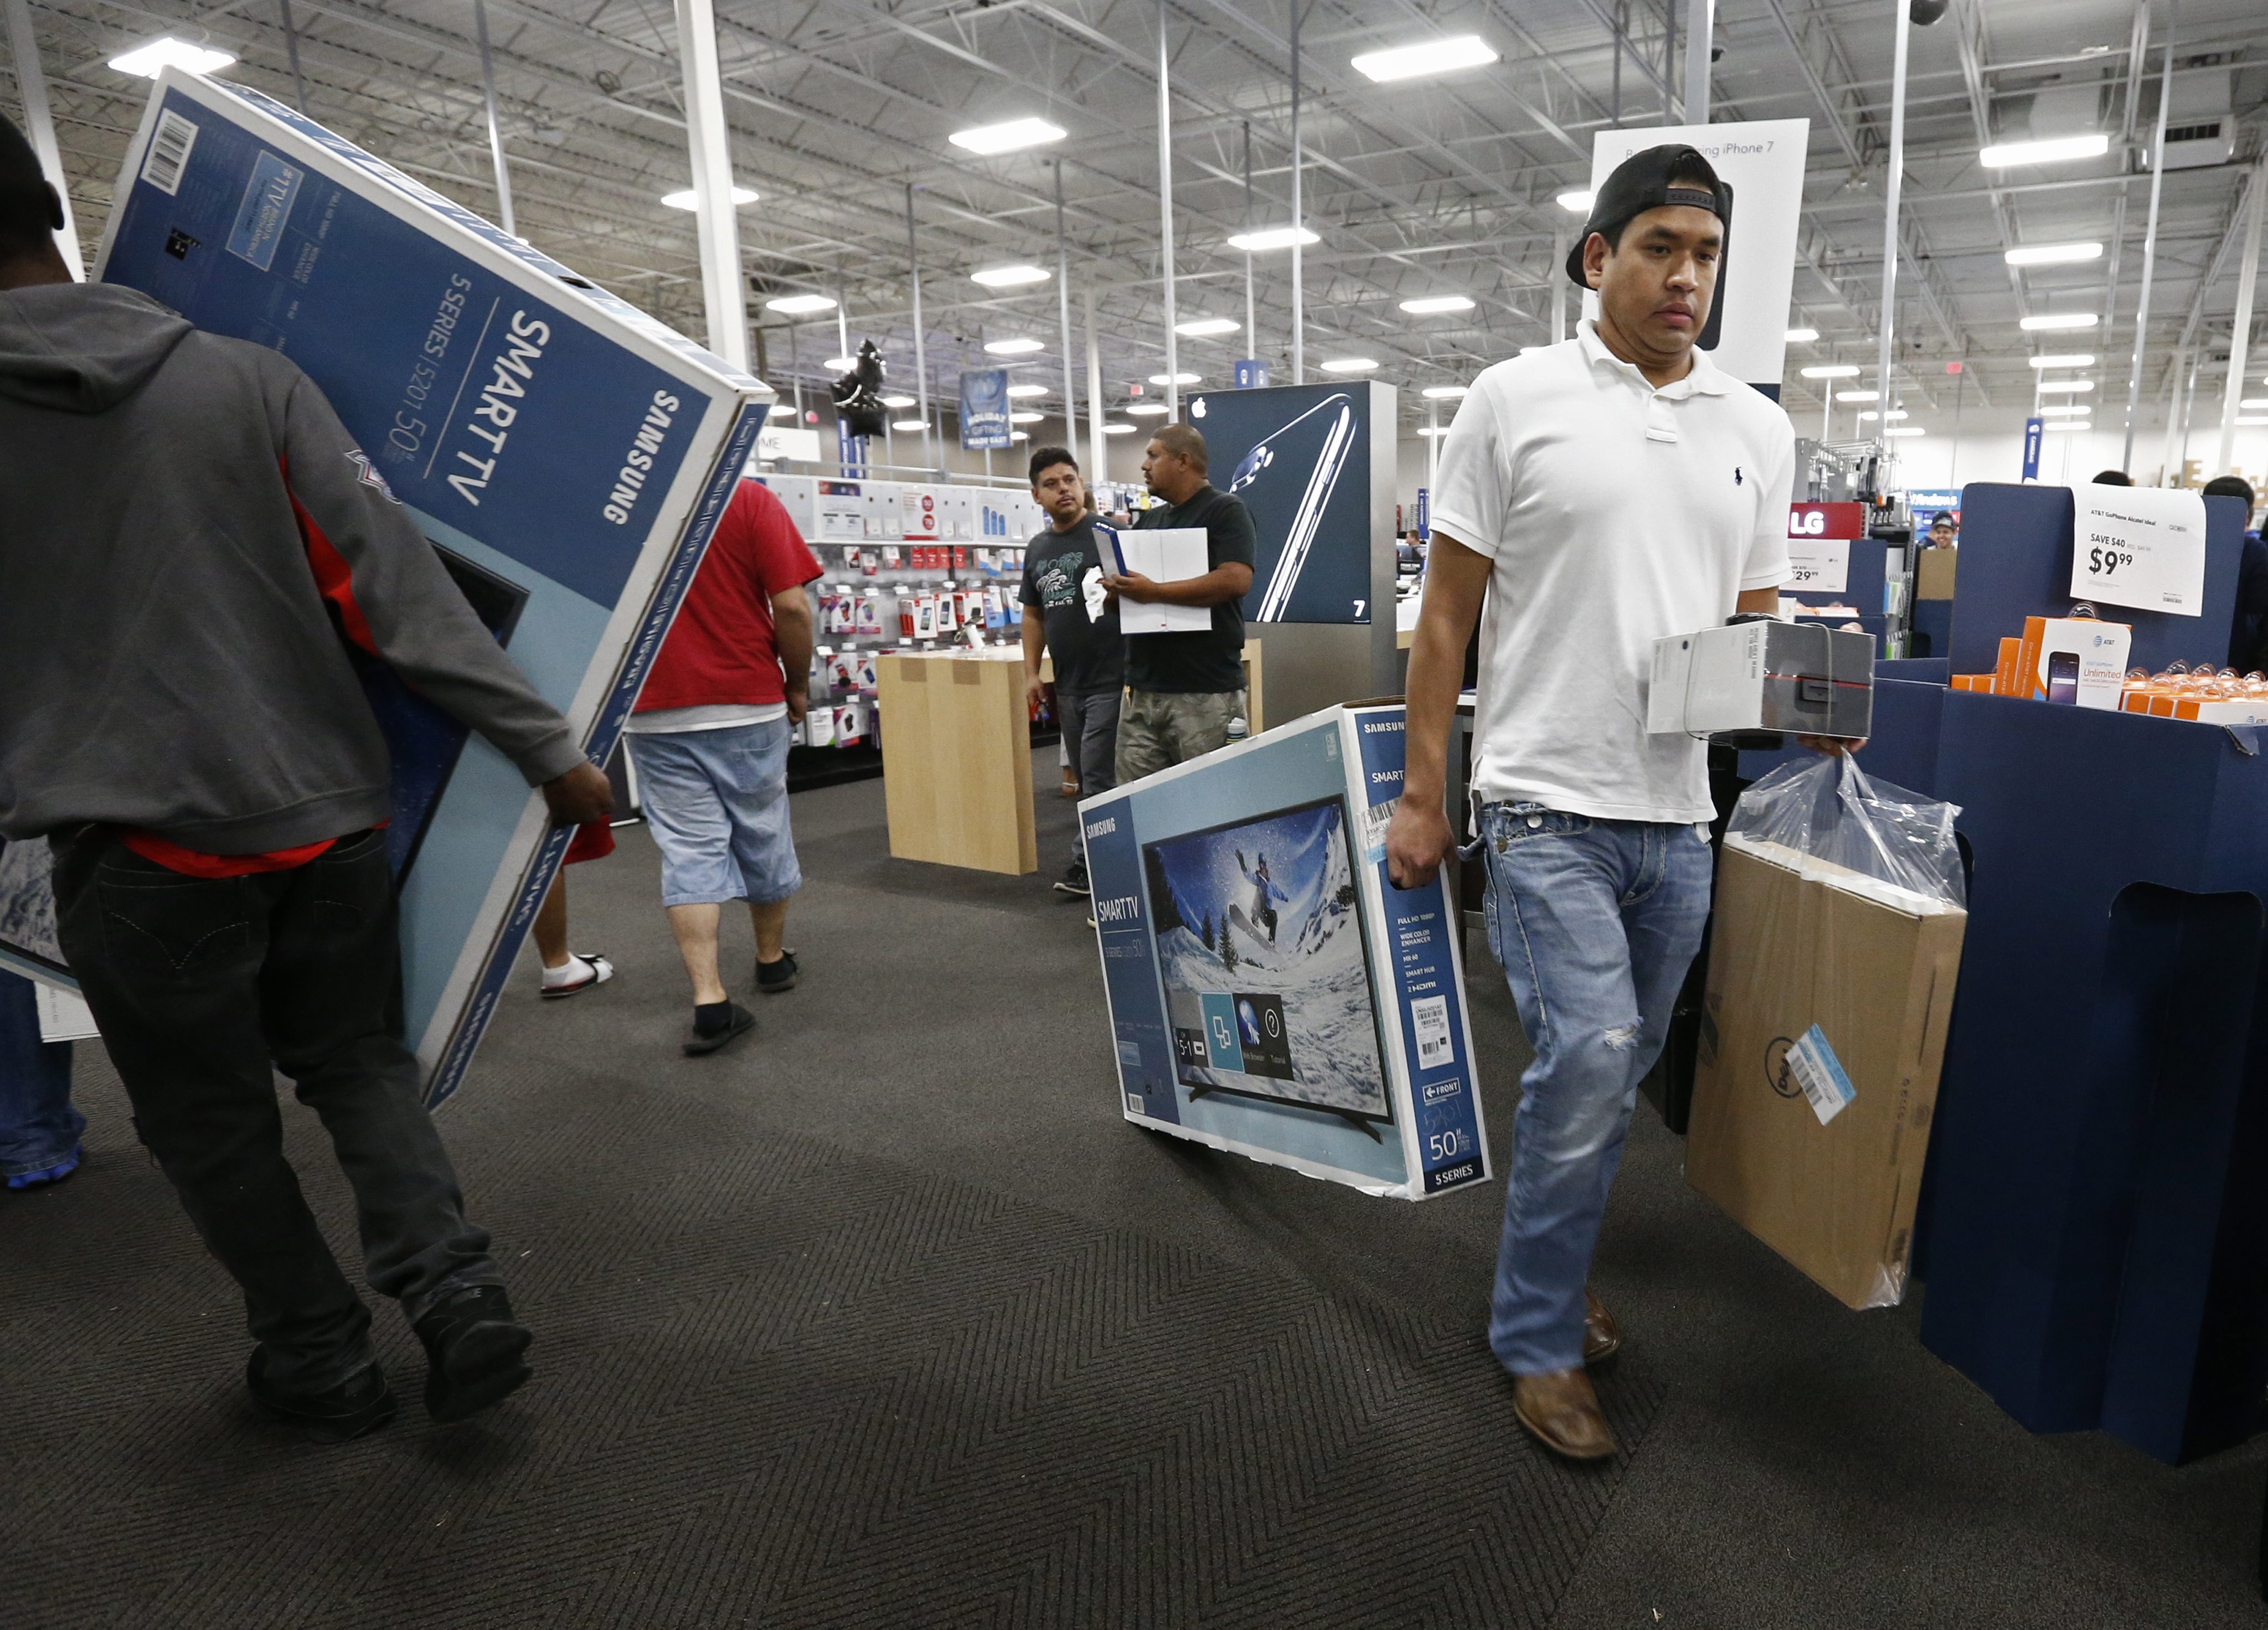 2016-11-24 22:10:56 epa05646396 People shop for televisions at the Best Buy store in Mesquite, Texas, USA, 24 November 2016. Best Buy and many other stores are opening on Thanksgiving Day, the day before Black Friday for shoppers. EPA/LARRY W. SMITH